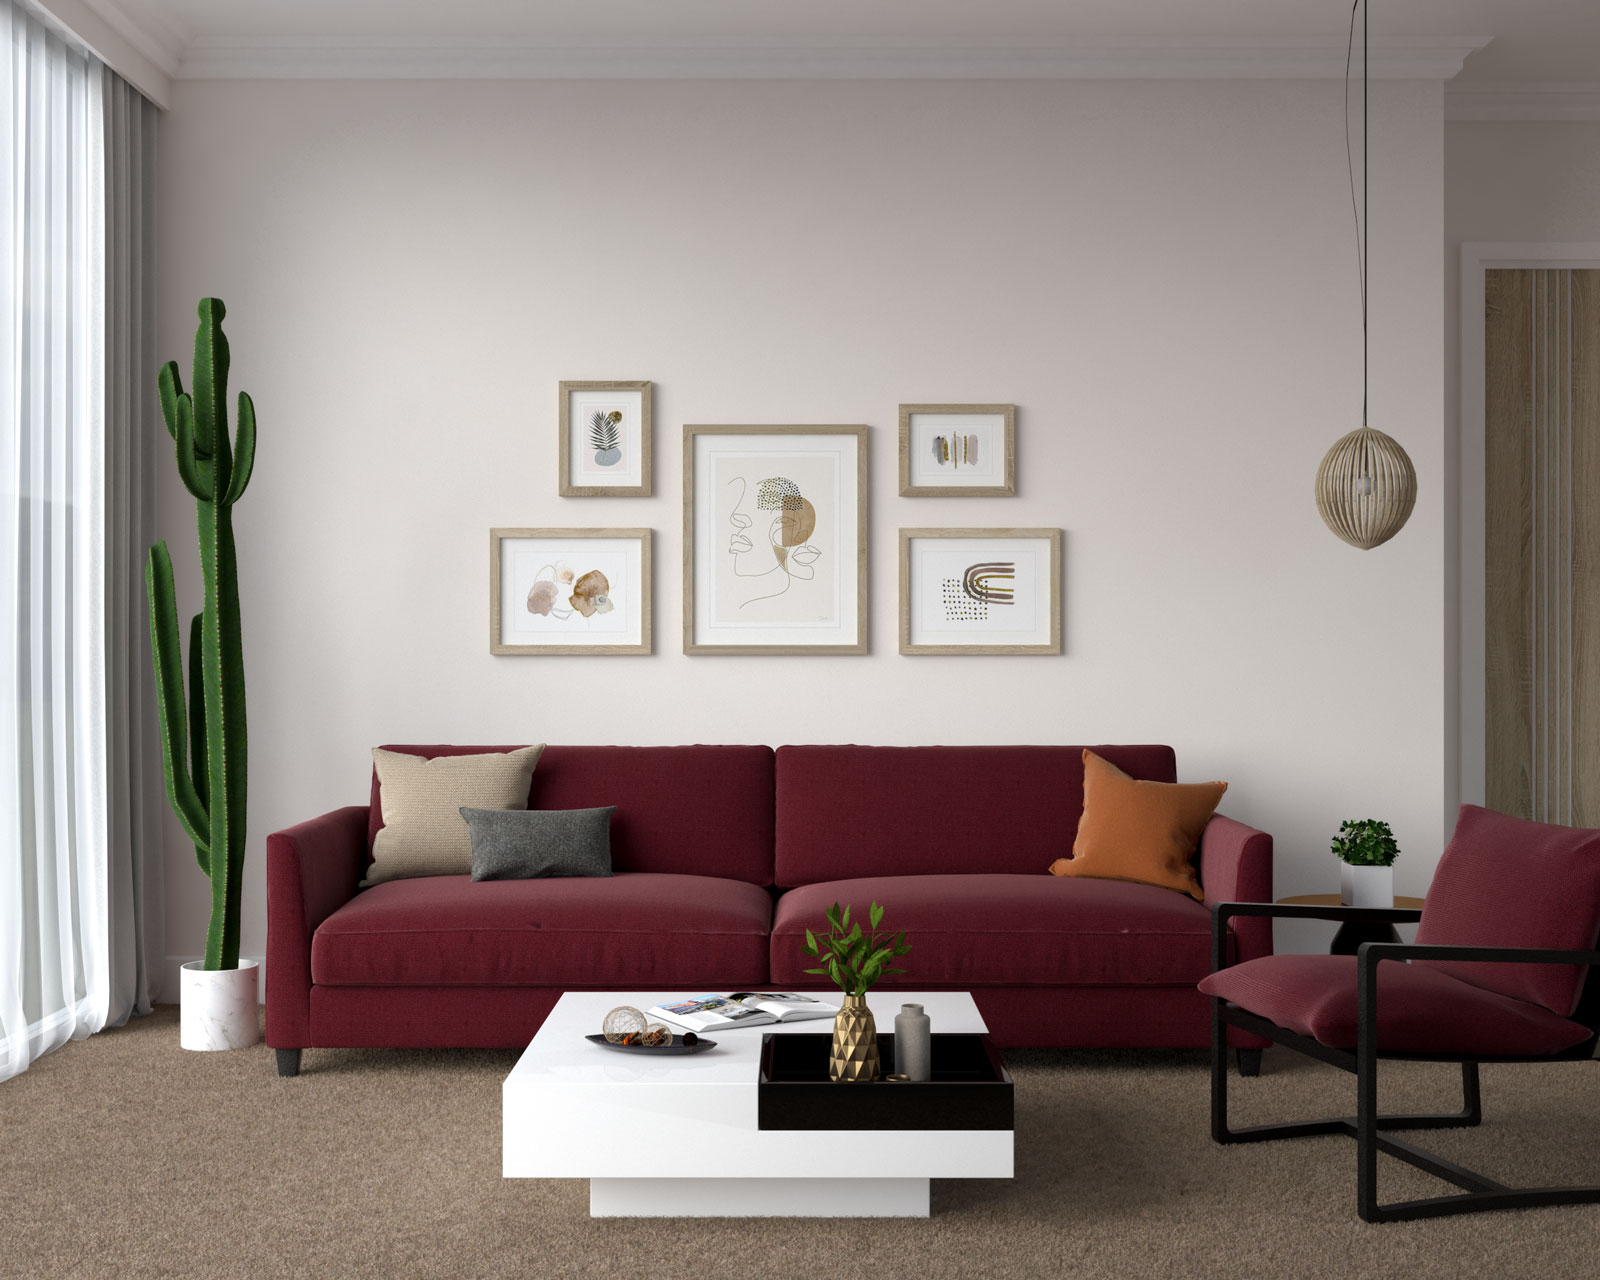 What Wall Colors Go With Burgundy Leather Sofa